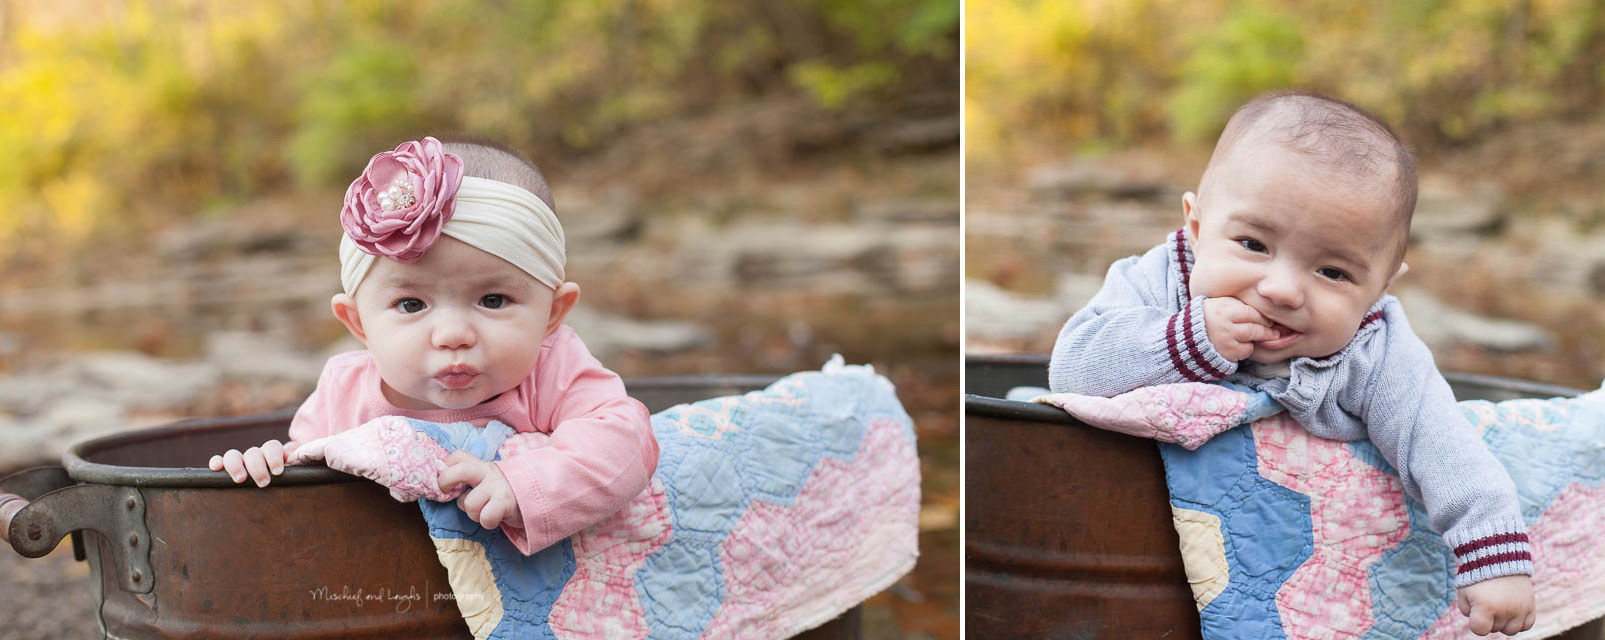 4 month old twins, Canandaigua family photographer, Mischief and Laughs